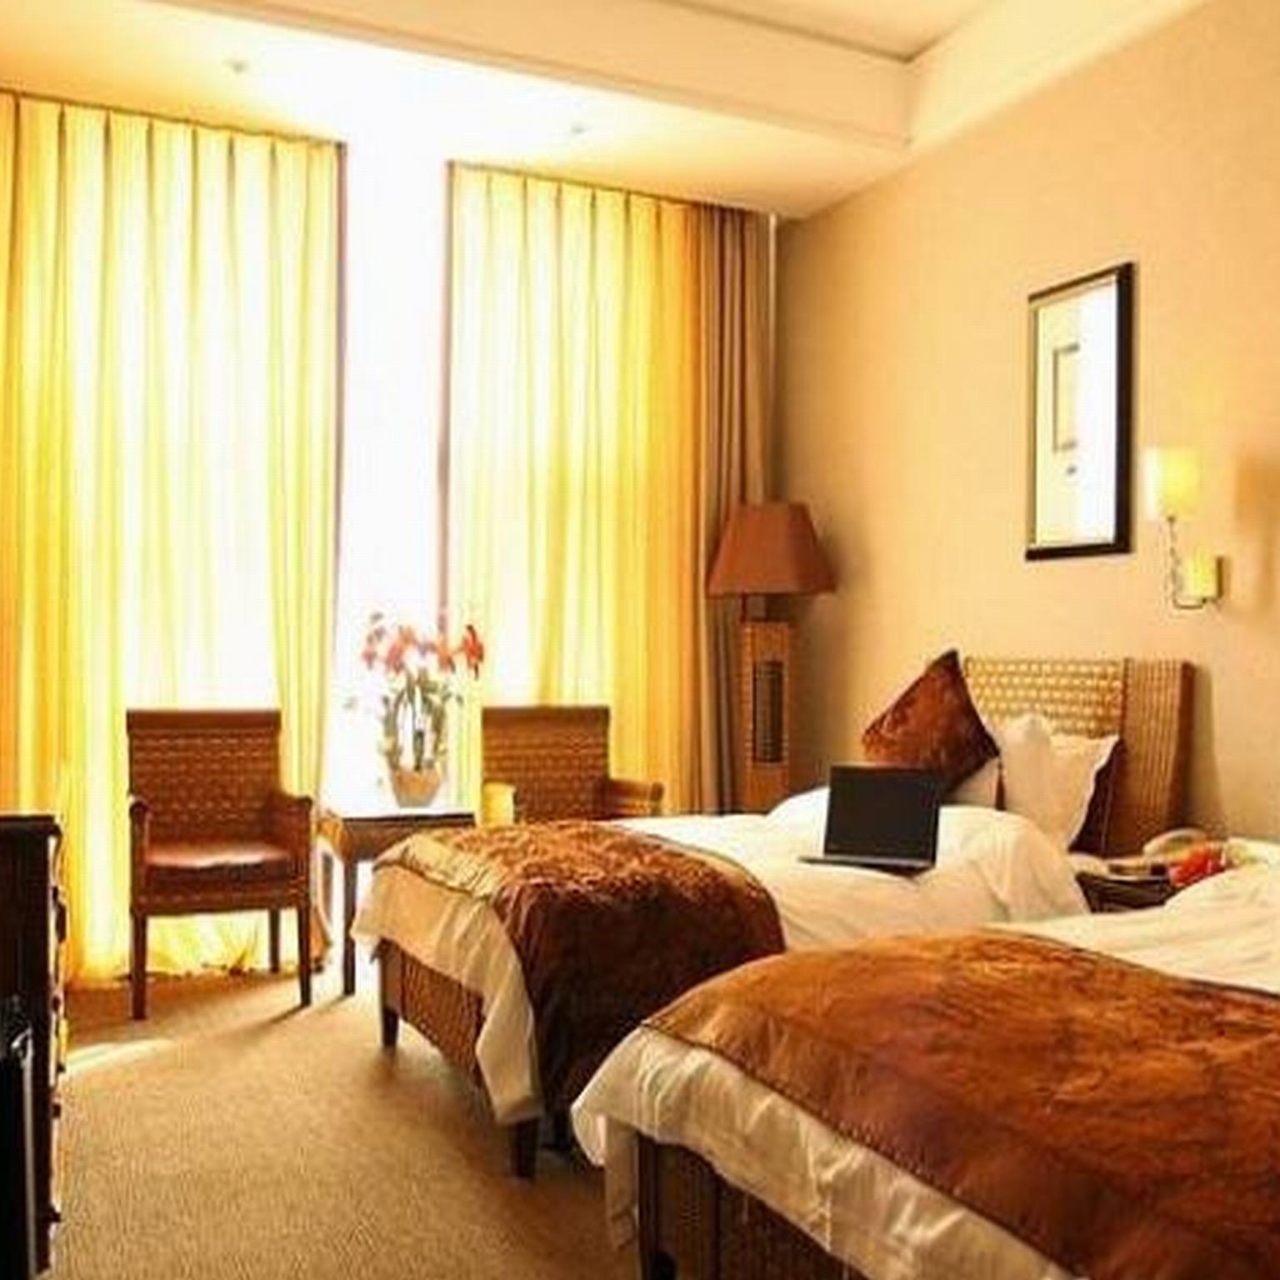 Hotel Dandong Pearl Lsland Golf Club China At Hrs With Free Services